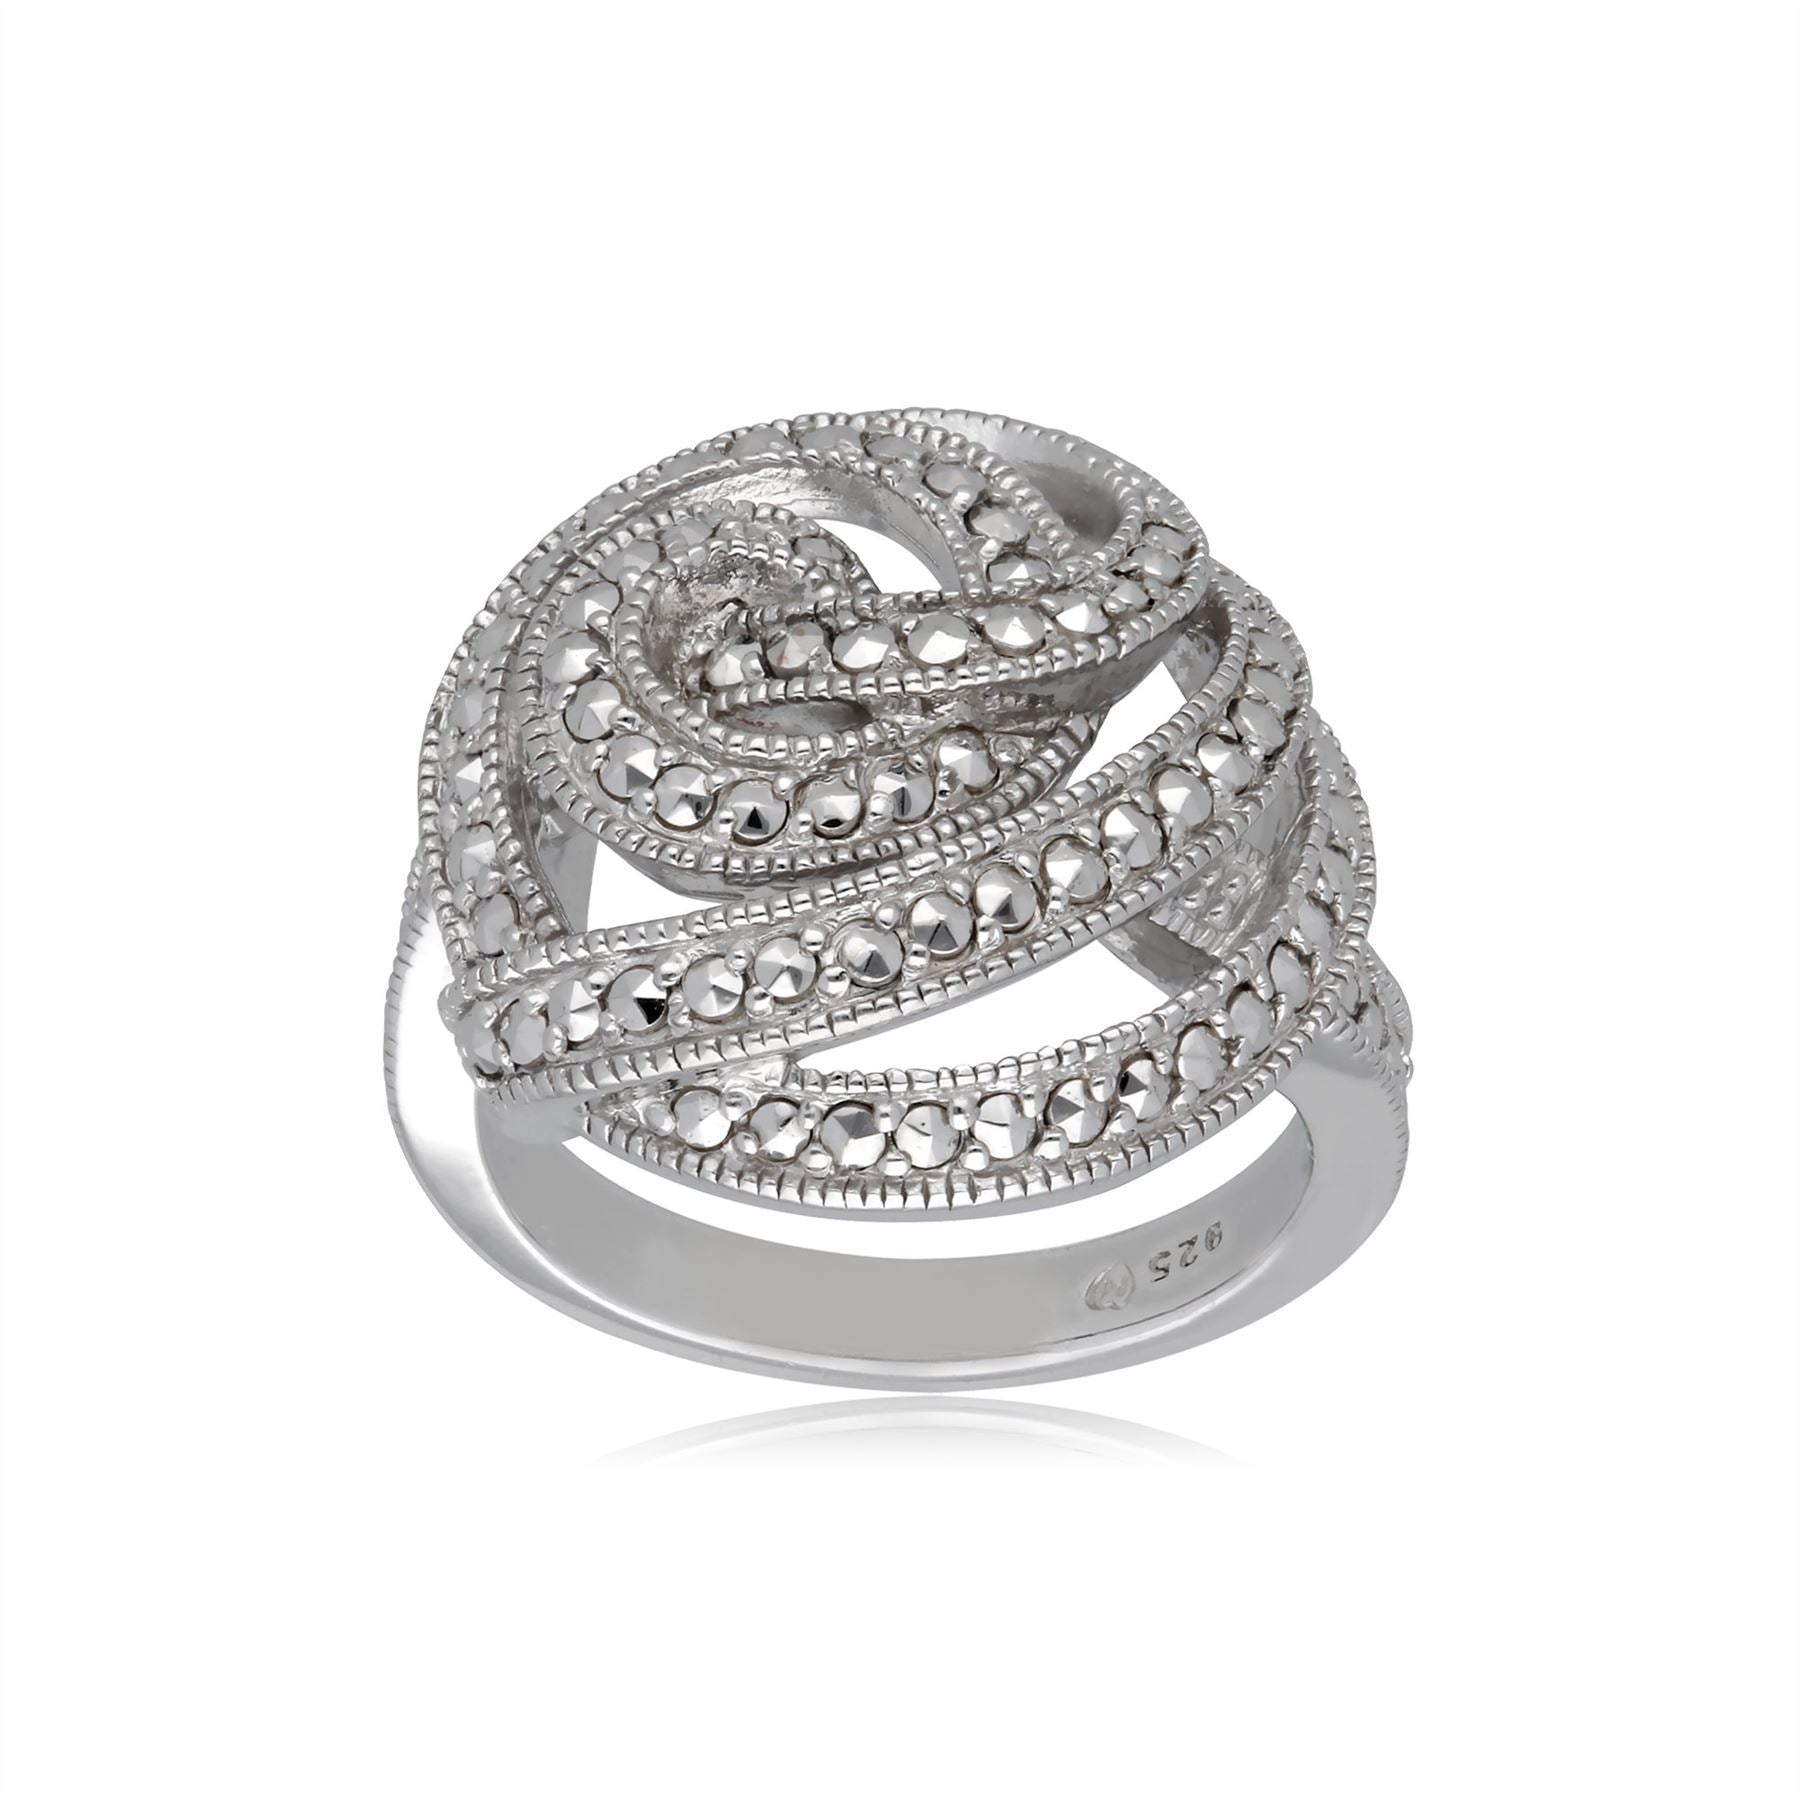 Marcasite Statement Spiral Cocktail Ring in Sterling Silver